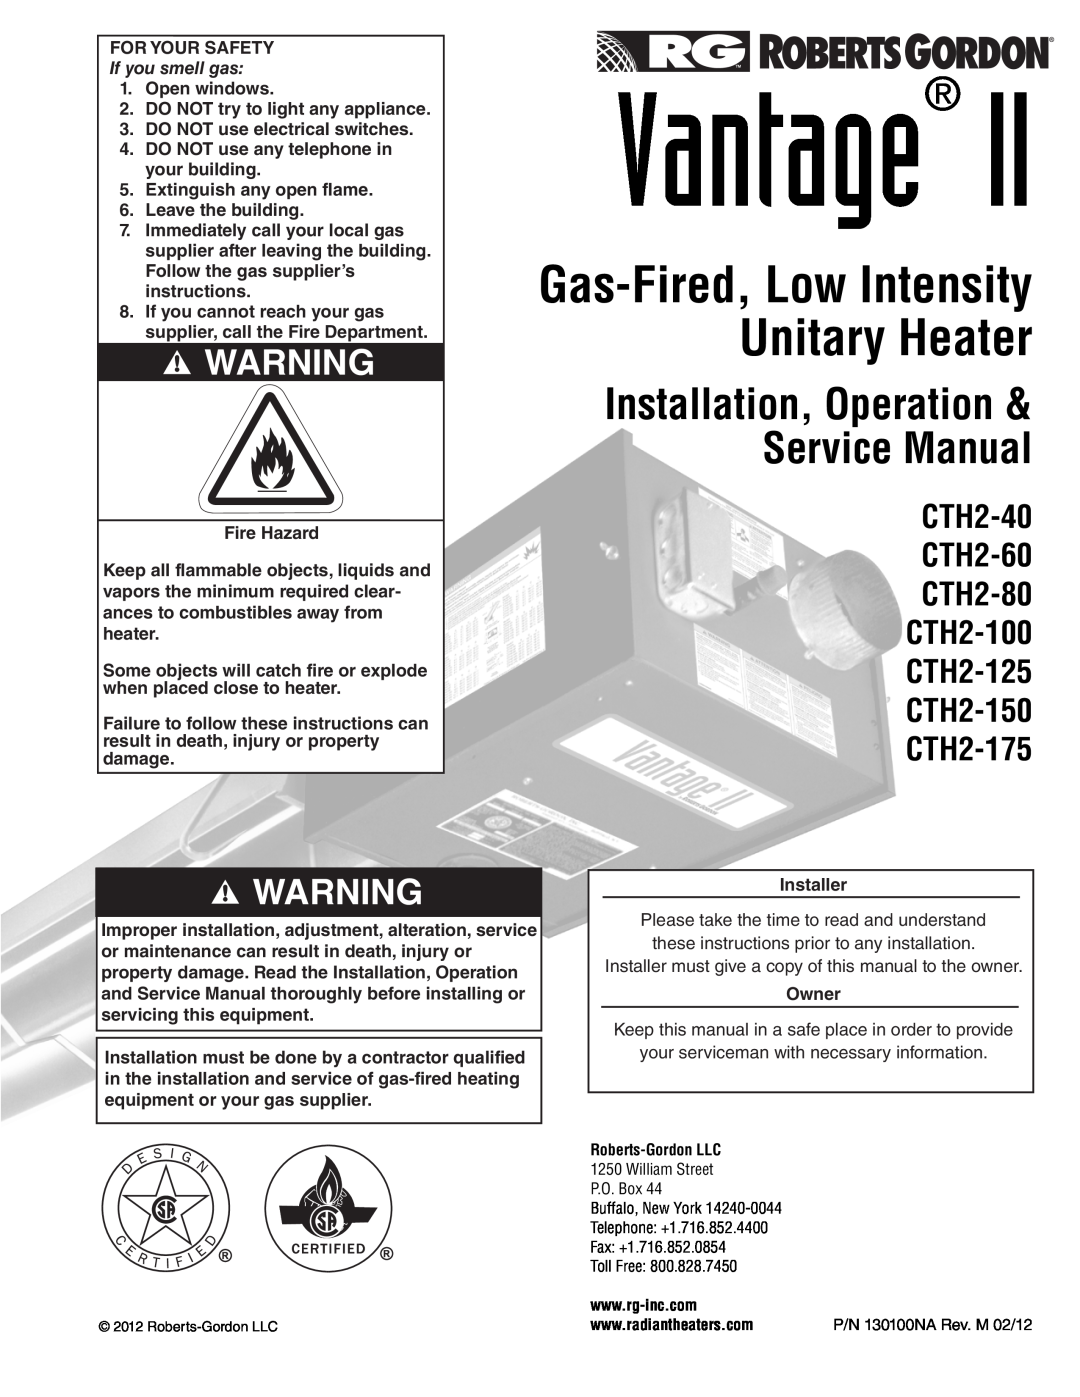 Roberts Gorden CTH2-80 service manual Vantage, Gas-Fired,Low Intensity, Unitary Heater, Installation, Operation, CTH2-40 